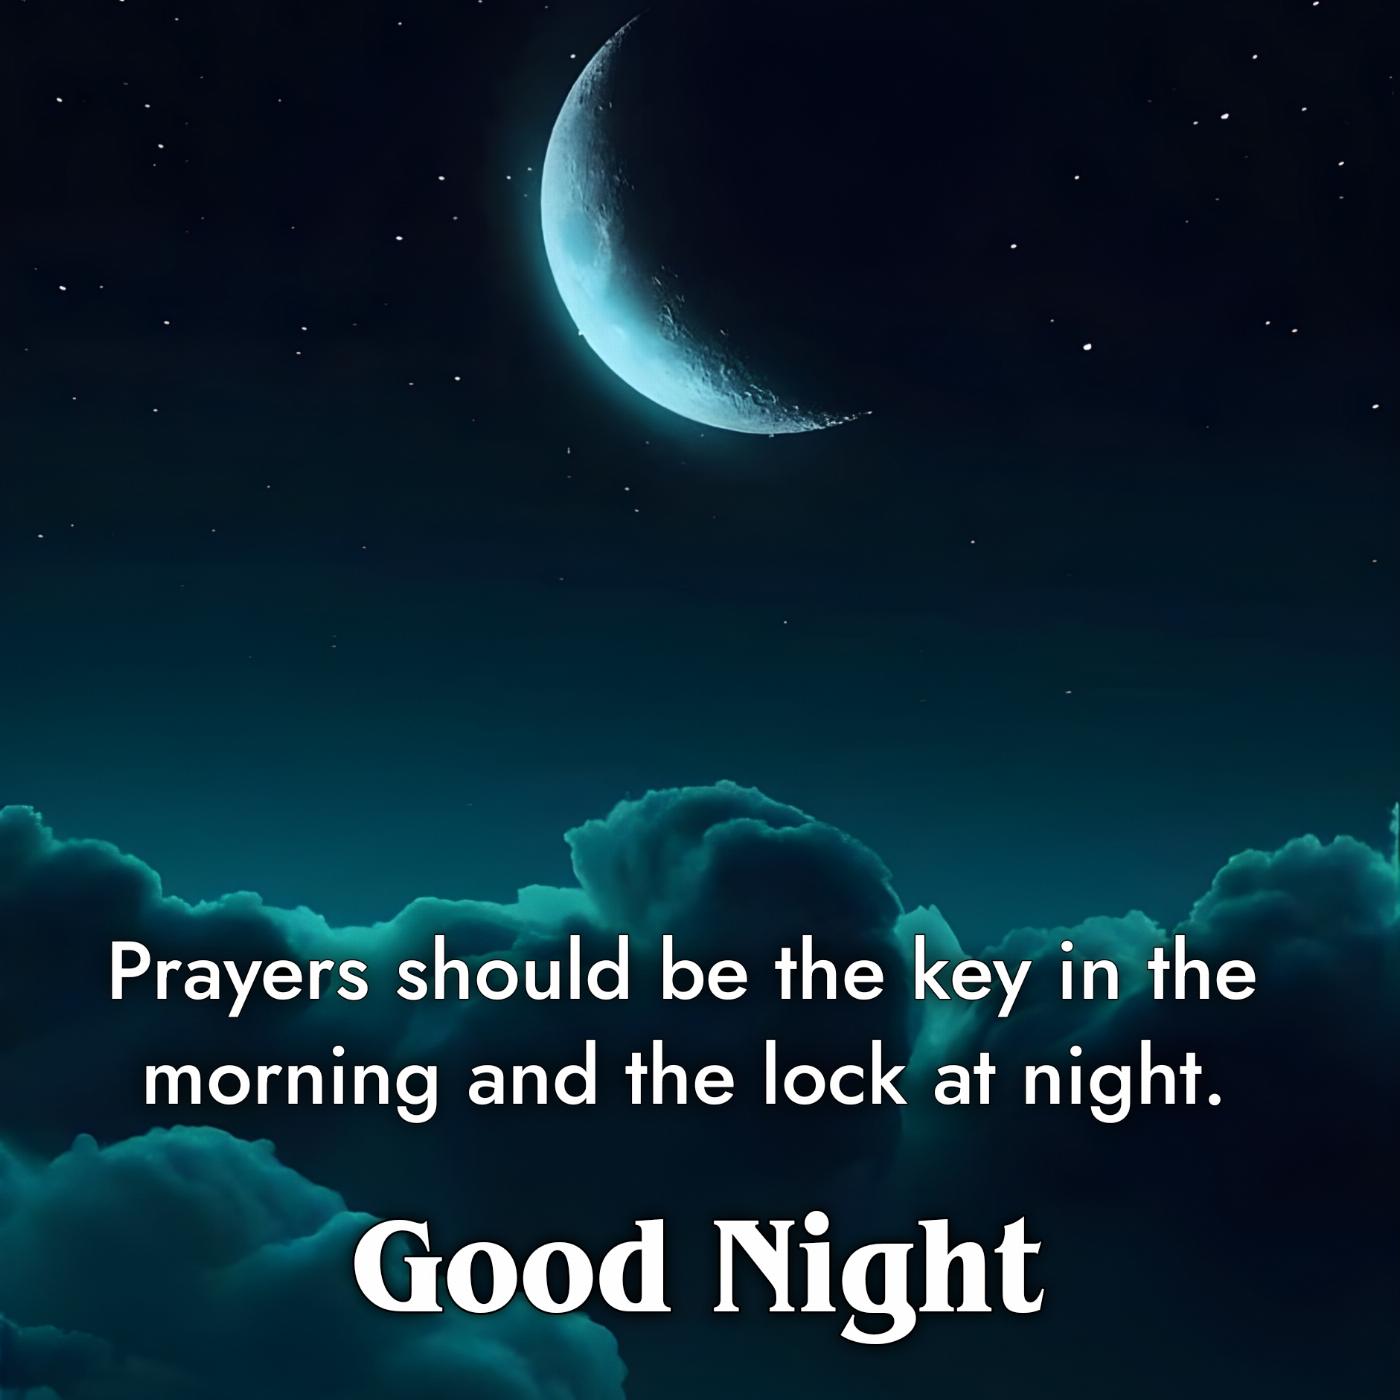 Prayers should be the key in the morning and the lock at night